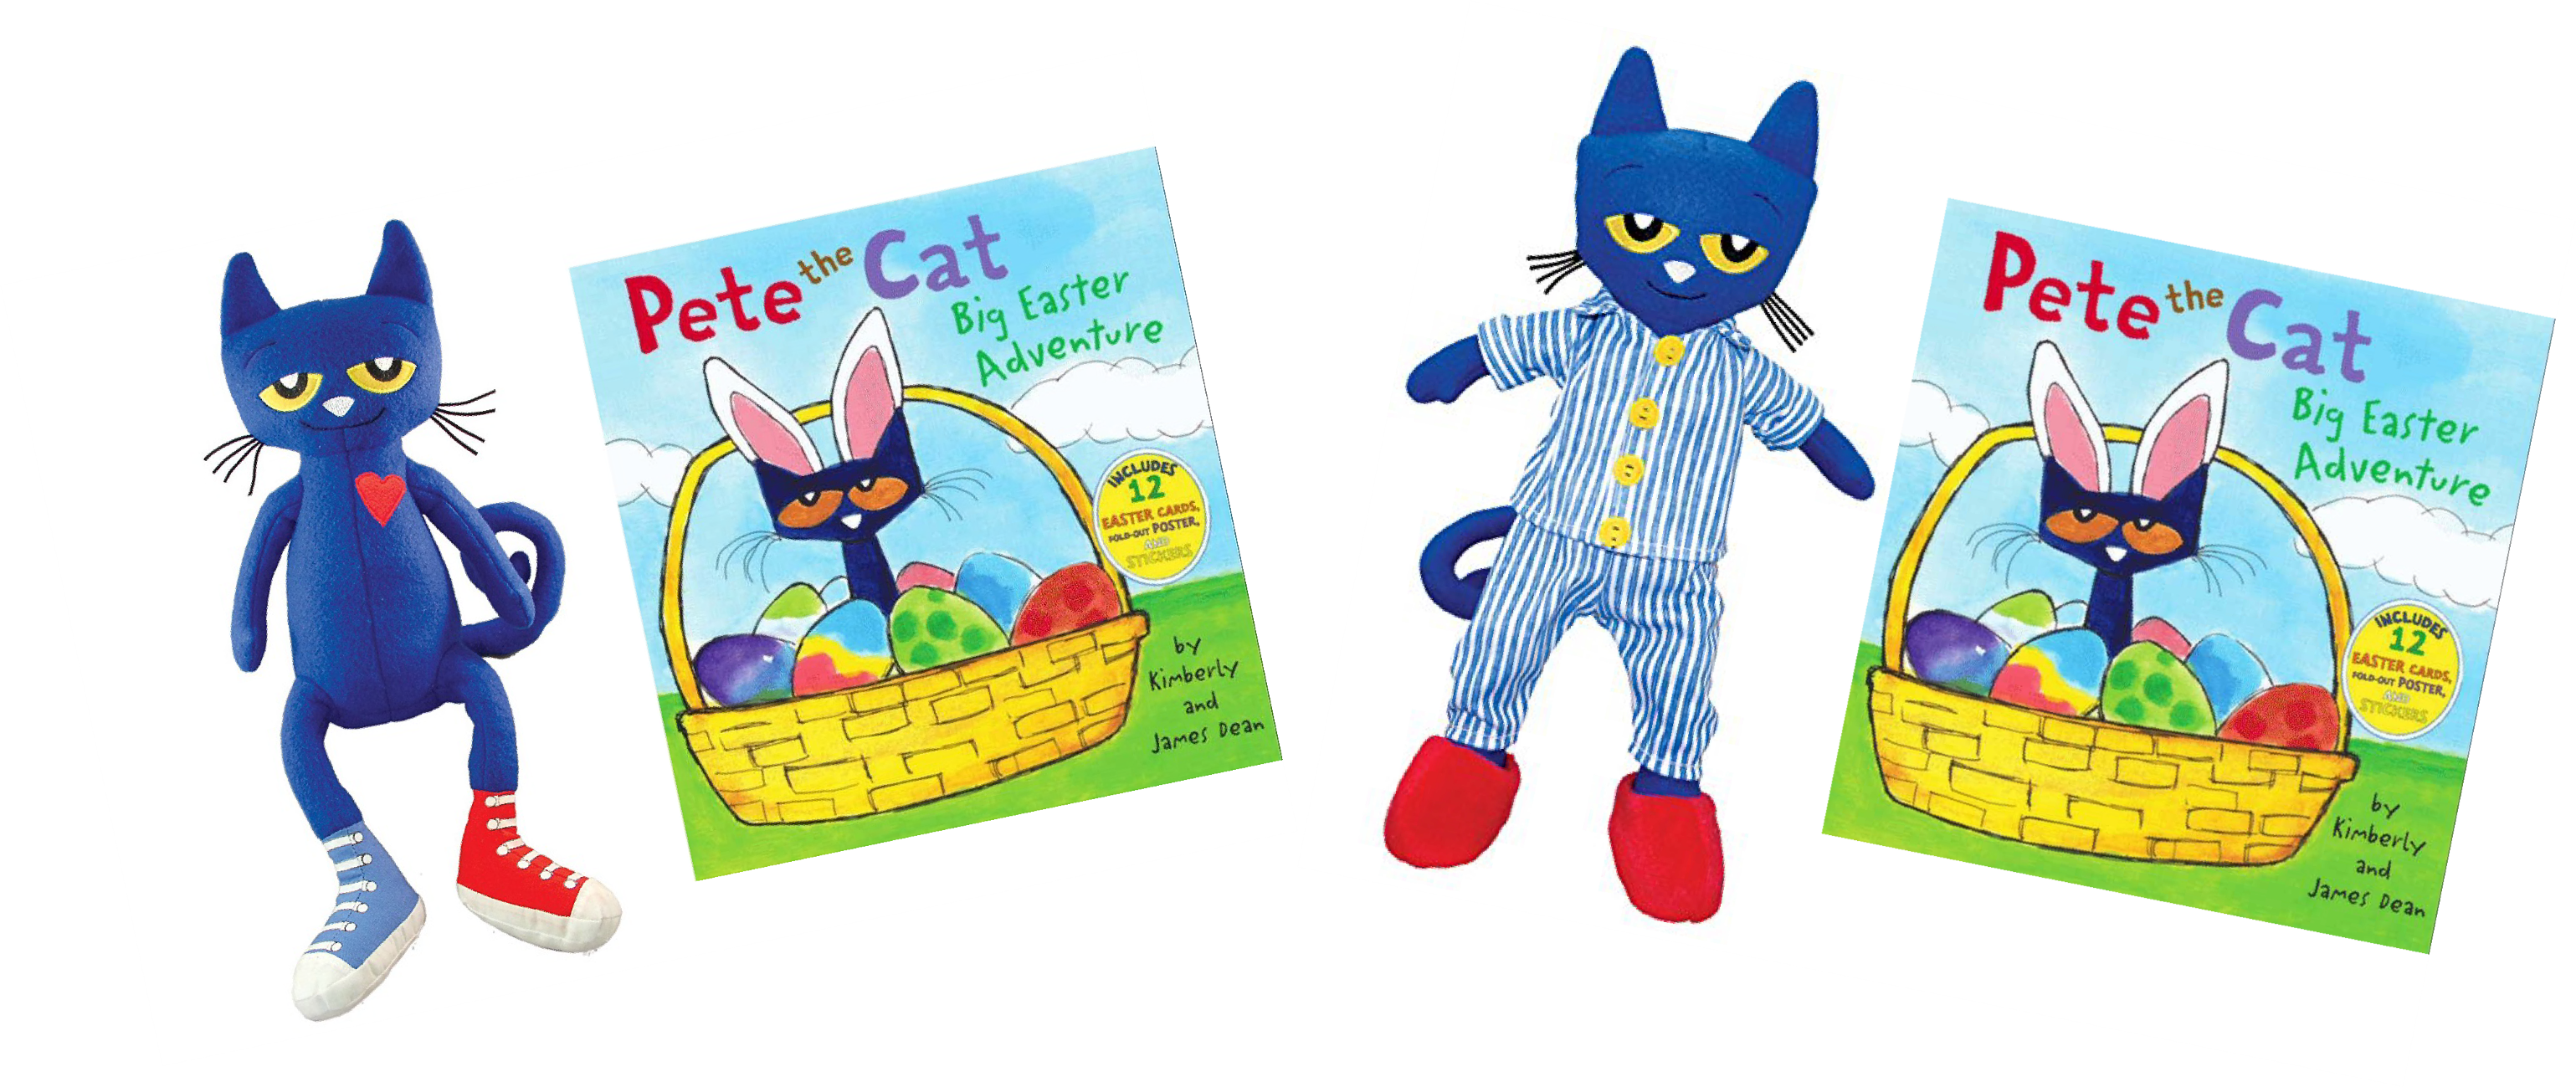 Pete The Cat Easter Adventure Promotional Material